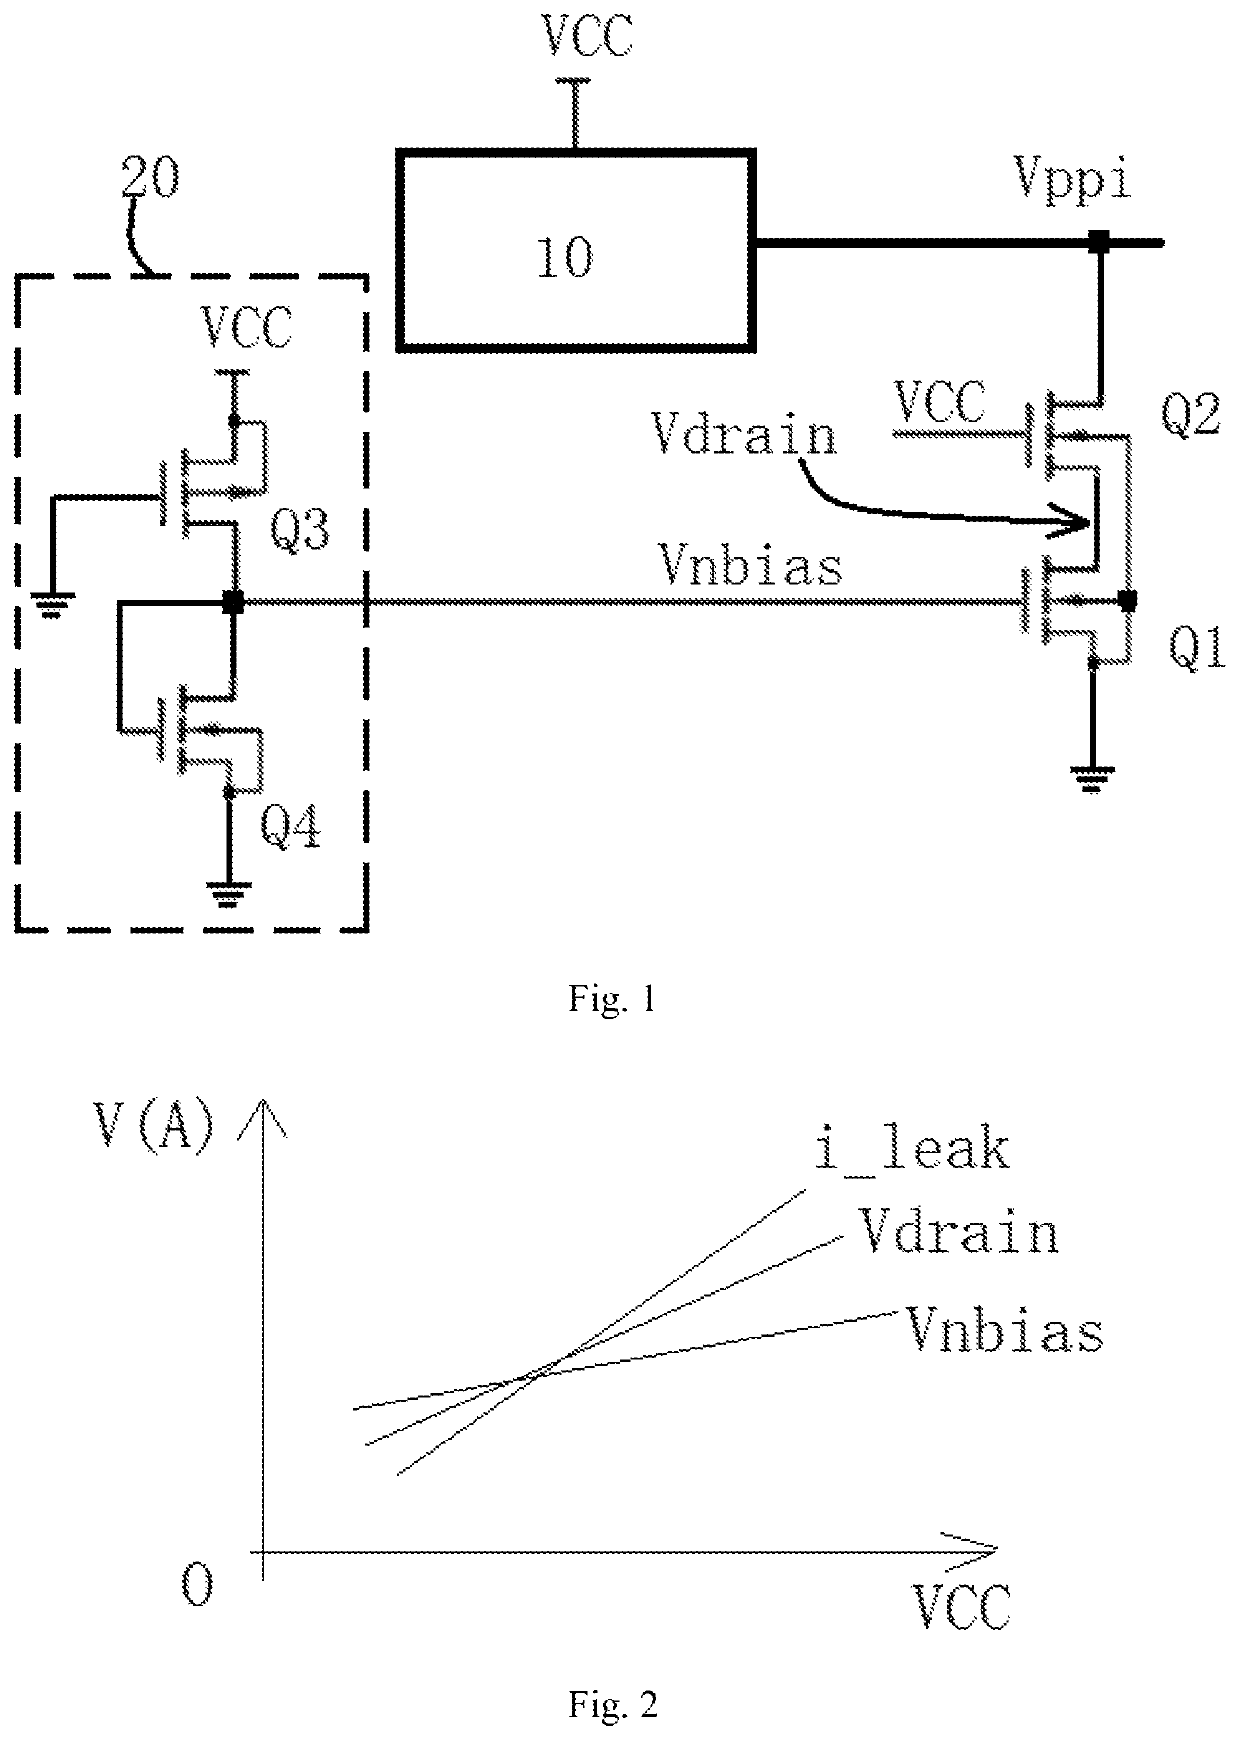 Circuit for regulating leakage current in charge pump